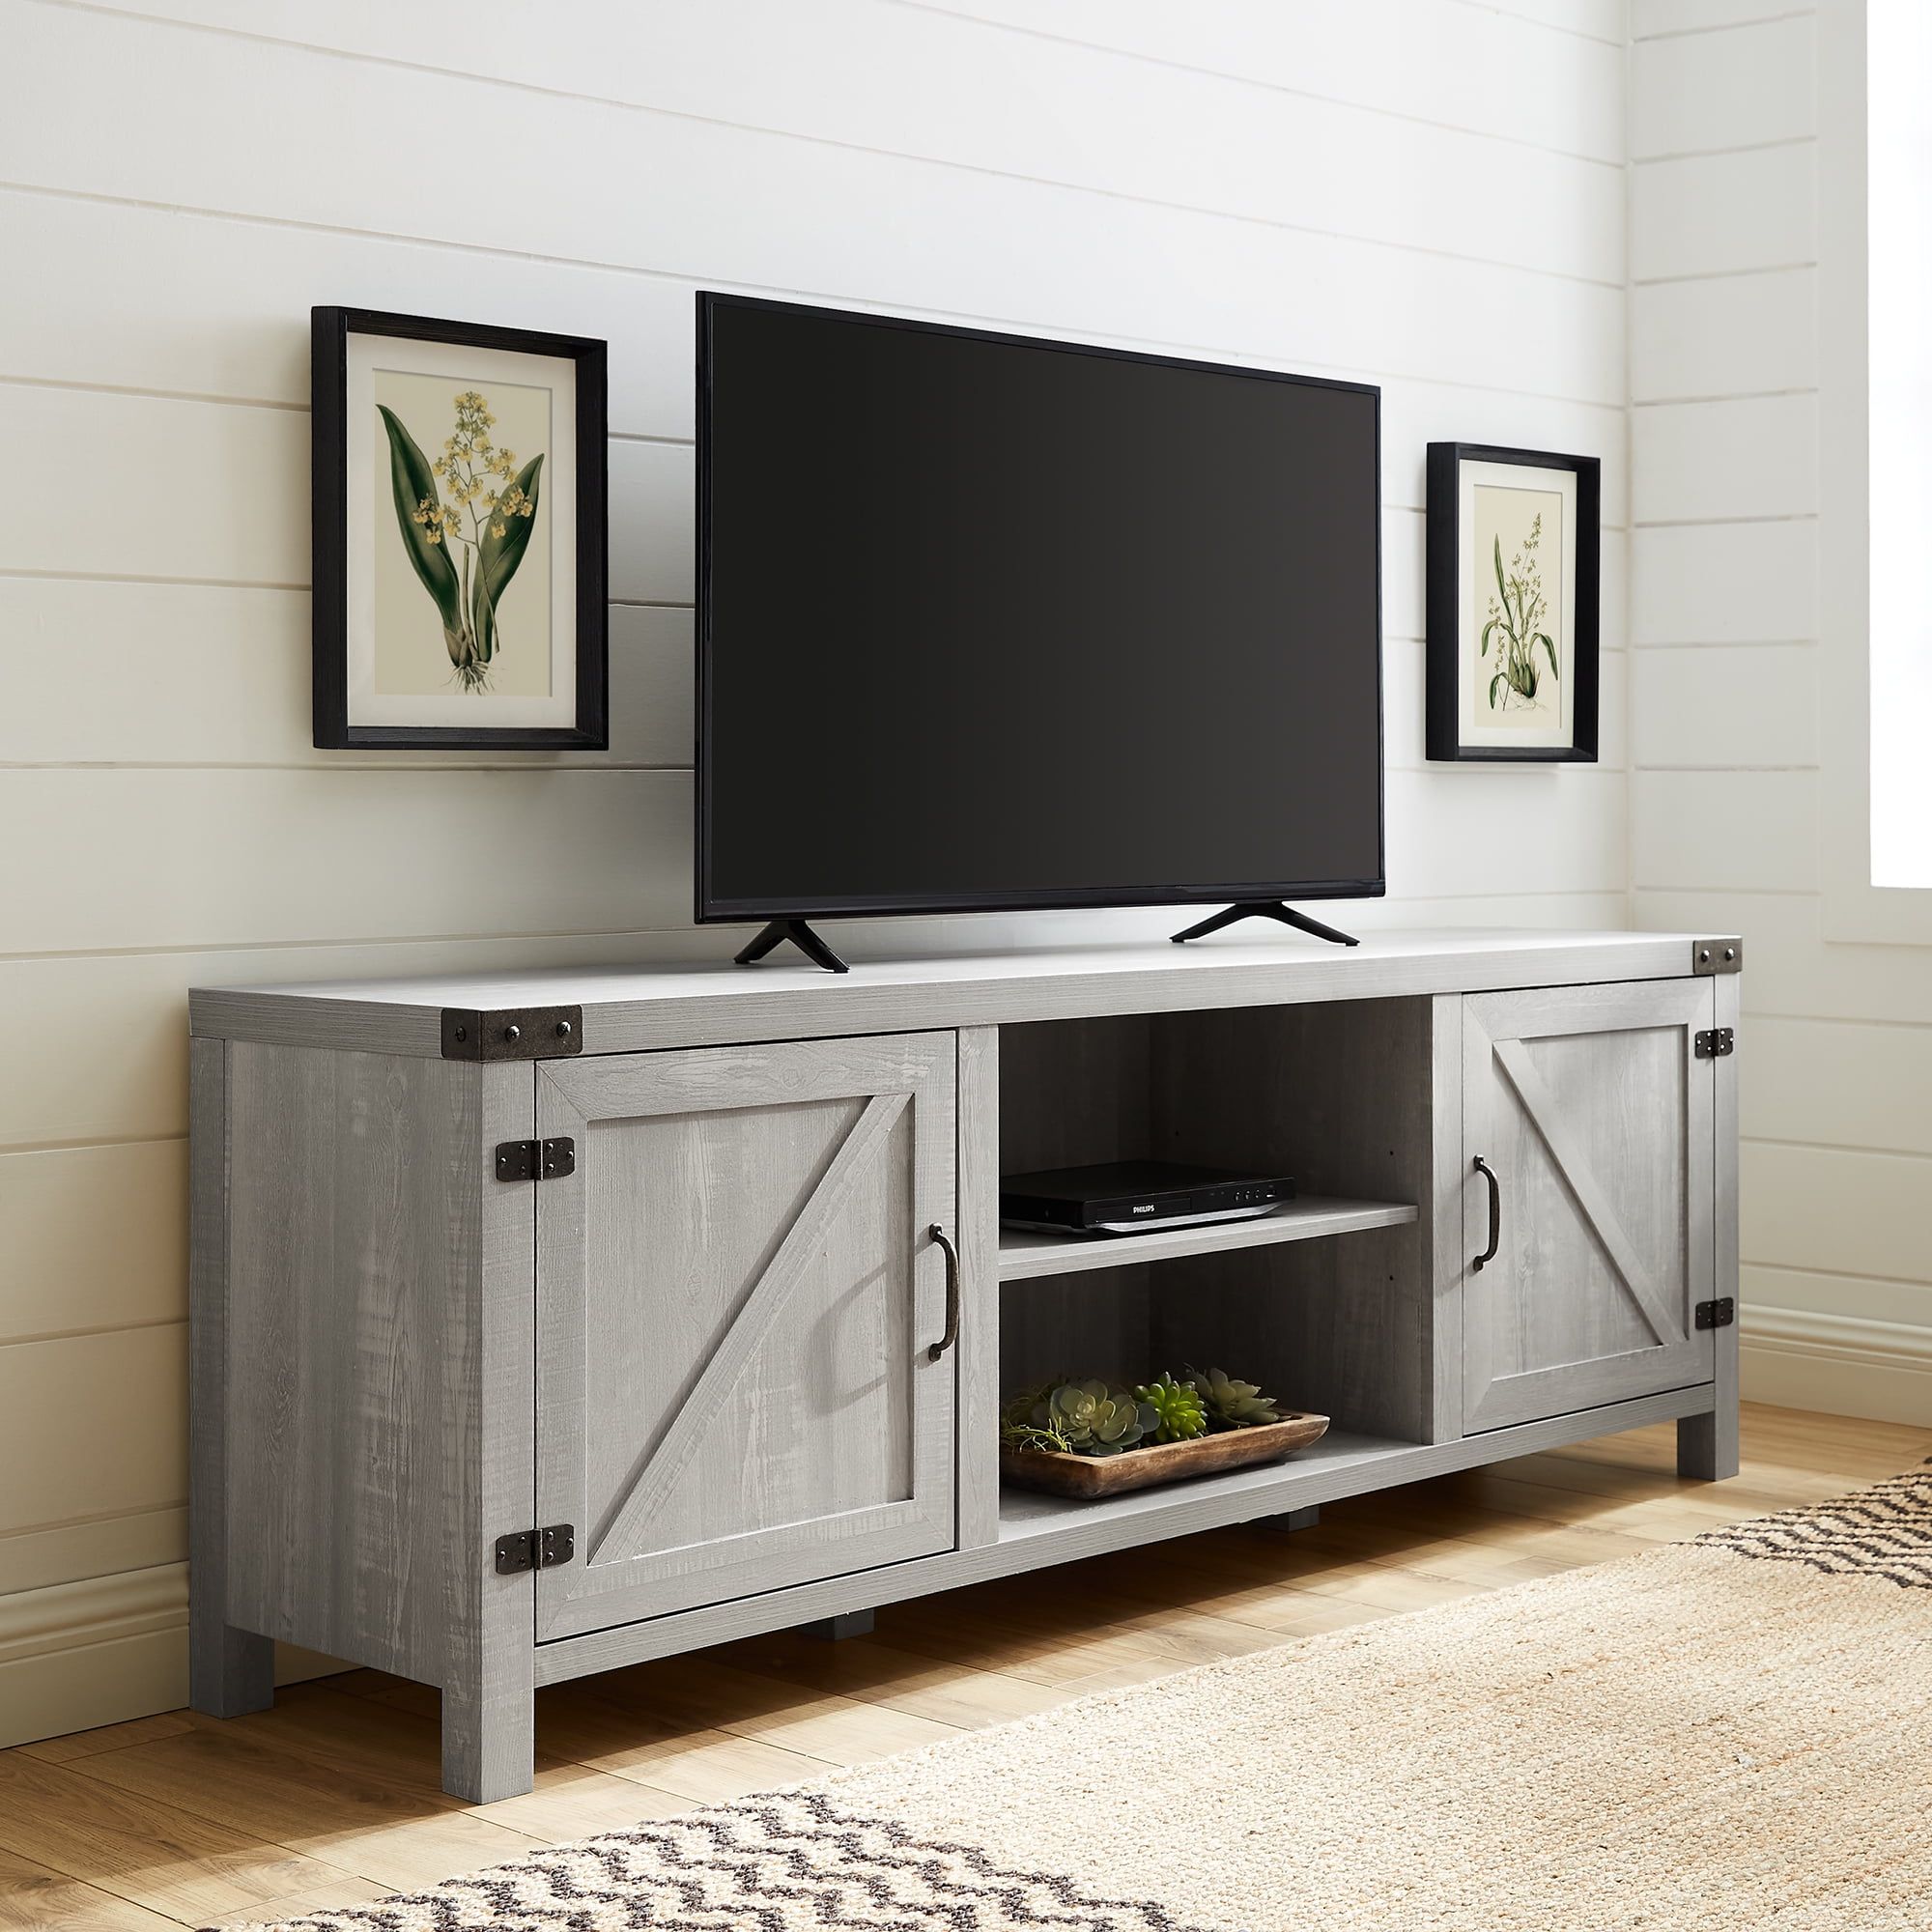 Woven Paths Farmhouse Barn Door Tv Stand For Tvs Up To 80", Stone Grey Intended For Farmhouse Tv Stands (Gallery 13 of 20)